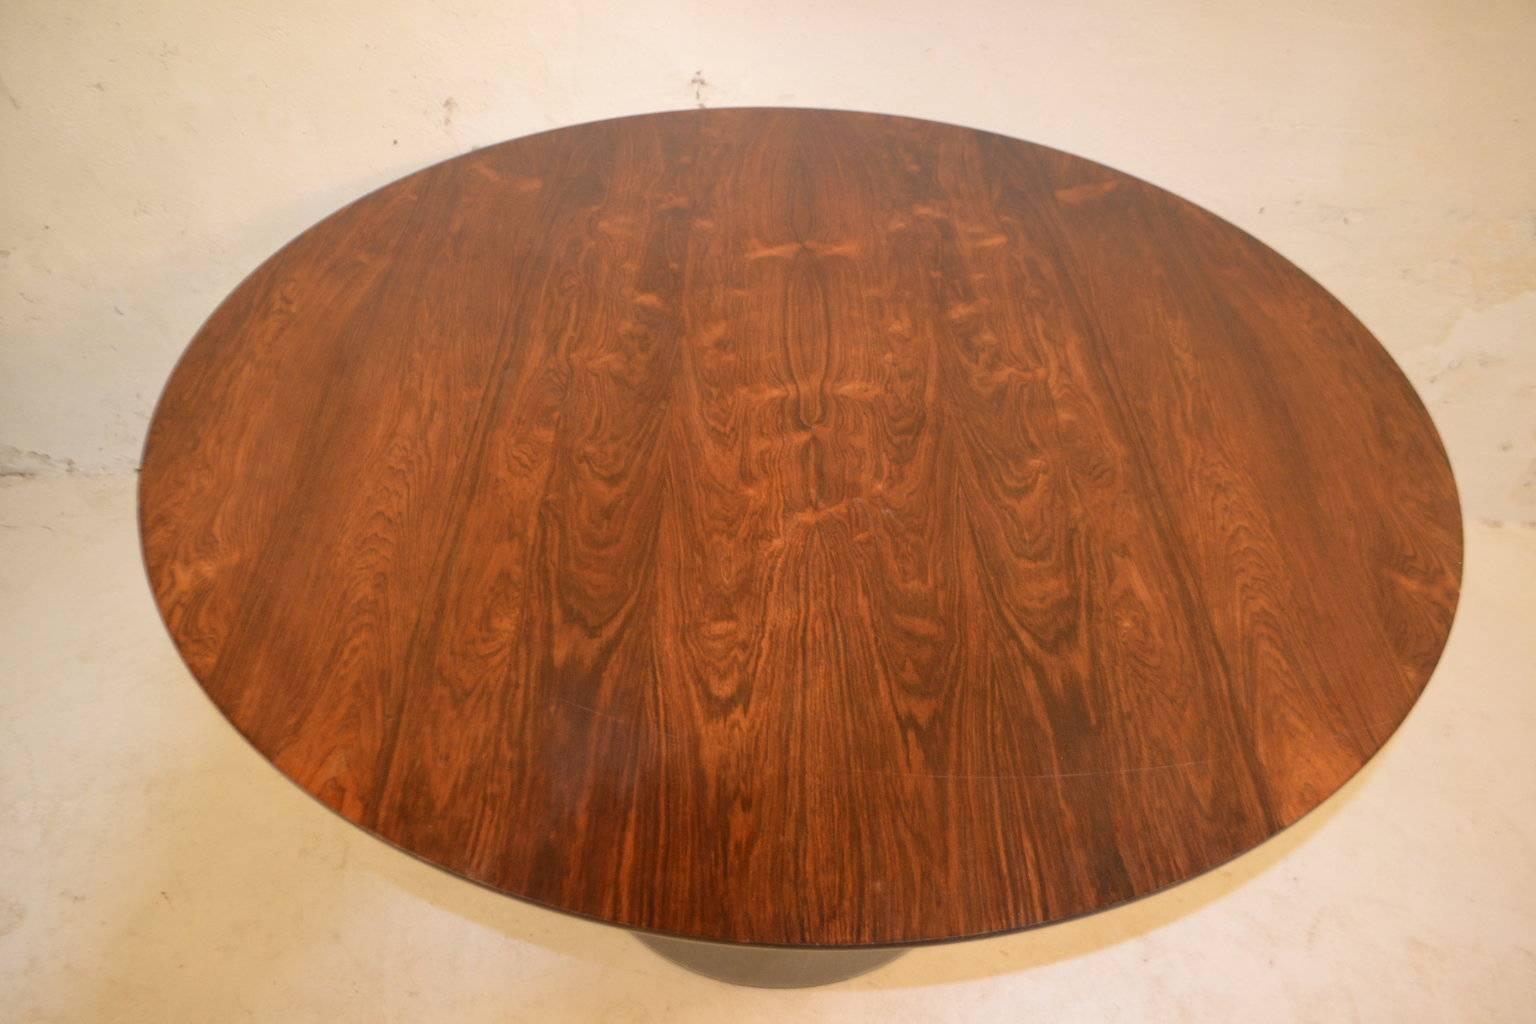 Large rosewood tulip dining table designed by Maurice Burke for Arkana, Bath, UK.

The table very comfortable seats six people.